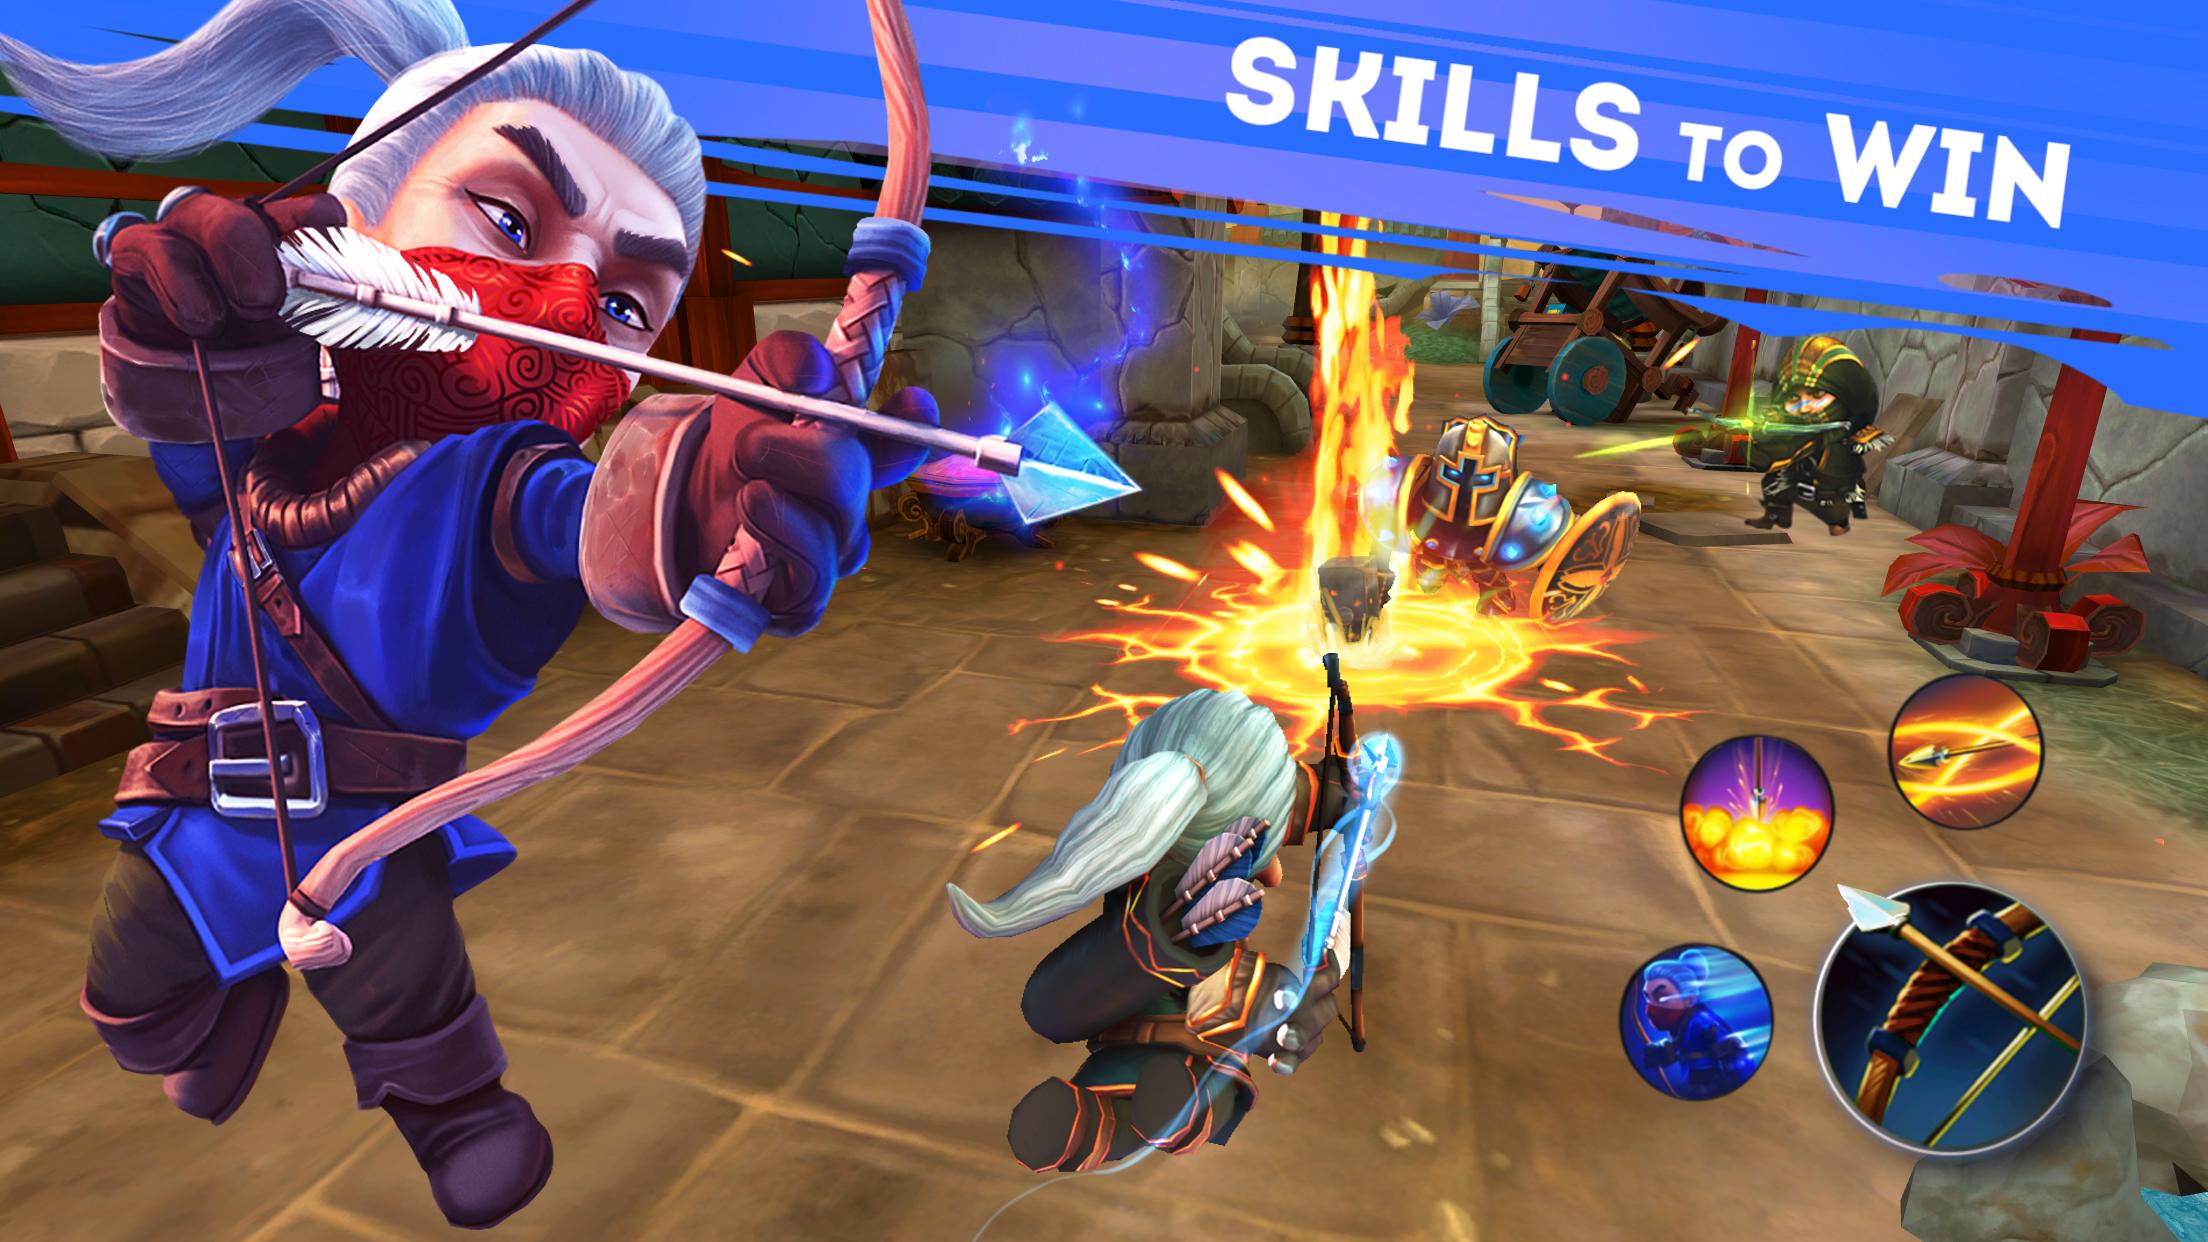 Endless Heroes Gameplay - Anime Idle RPG Android APK Pre-Download 